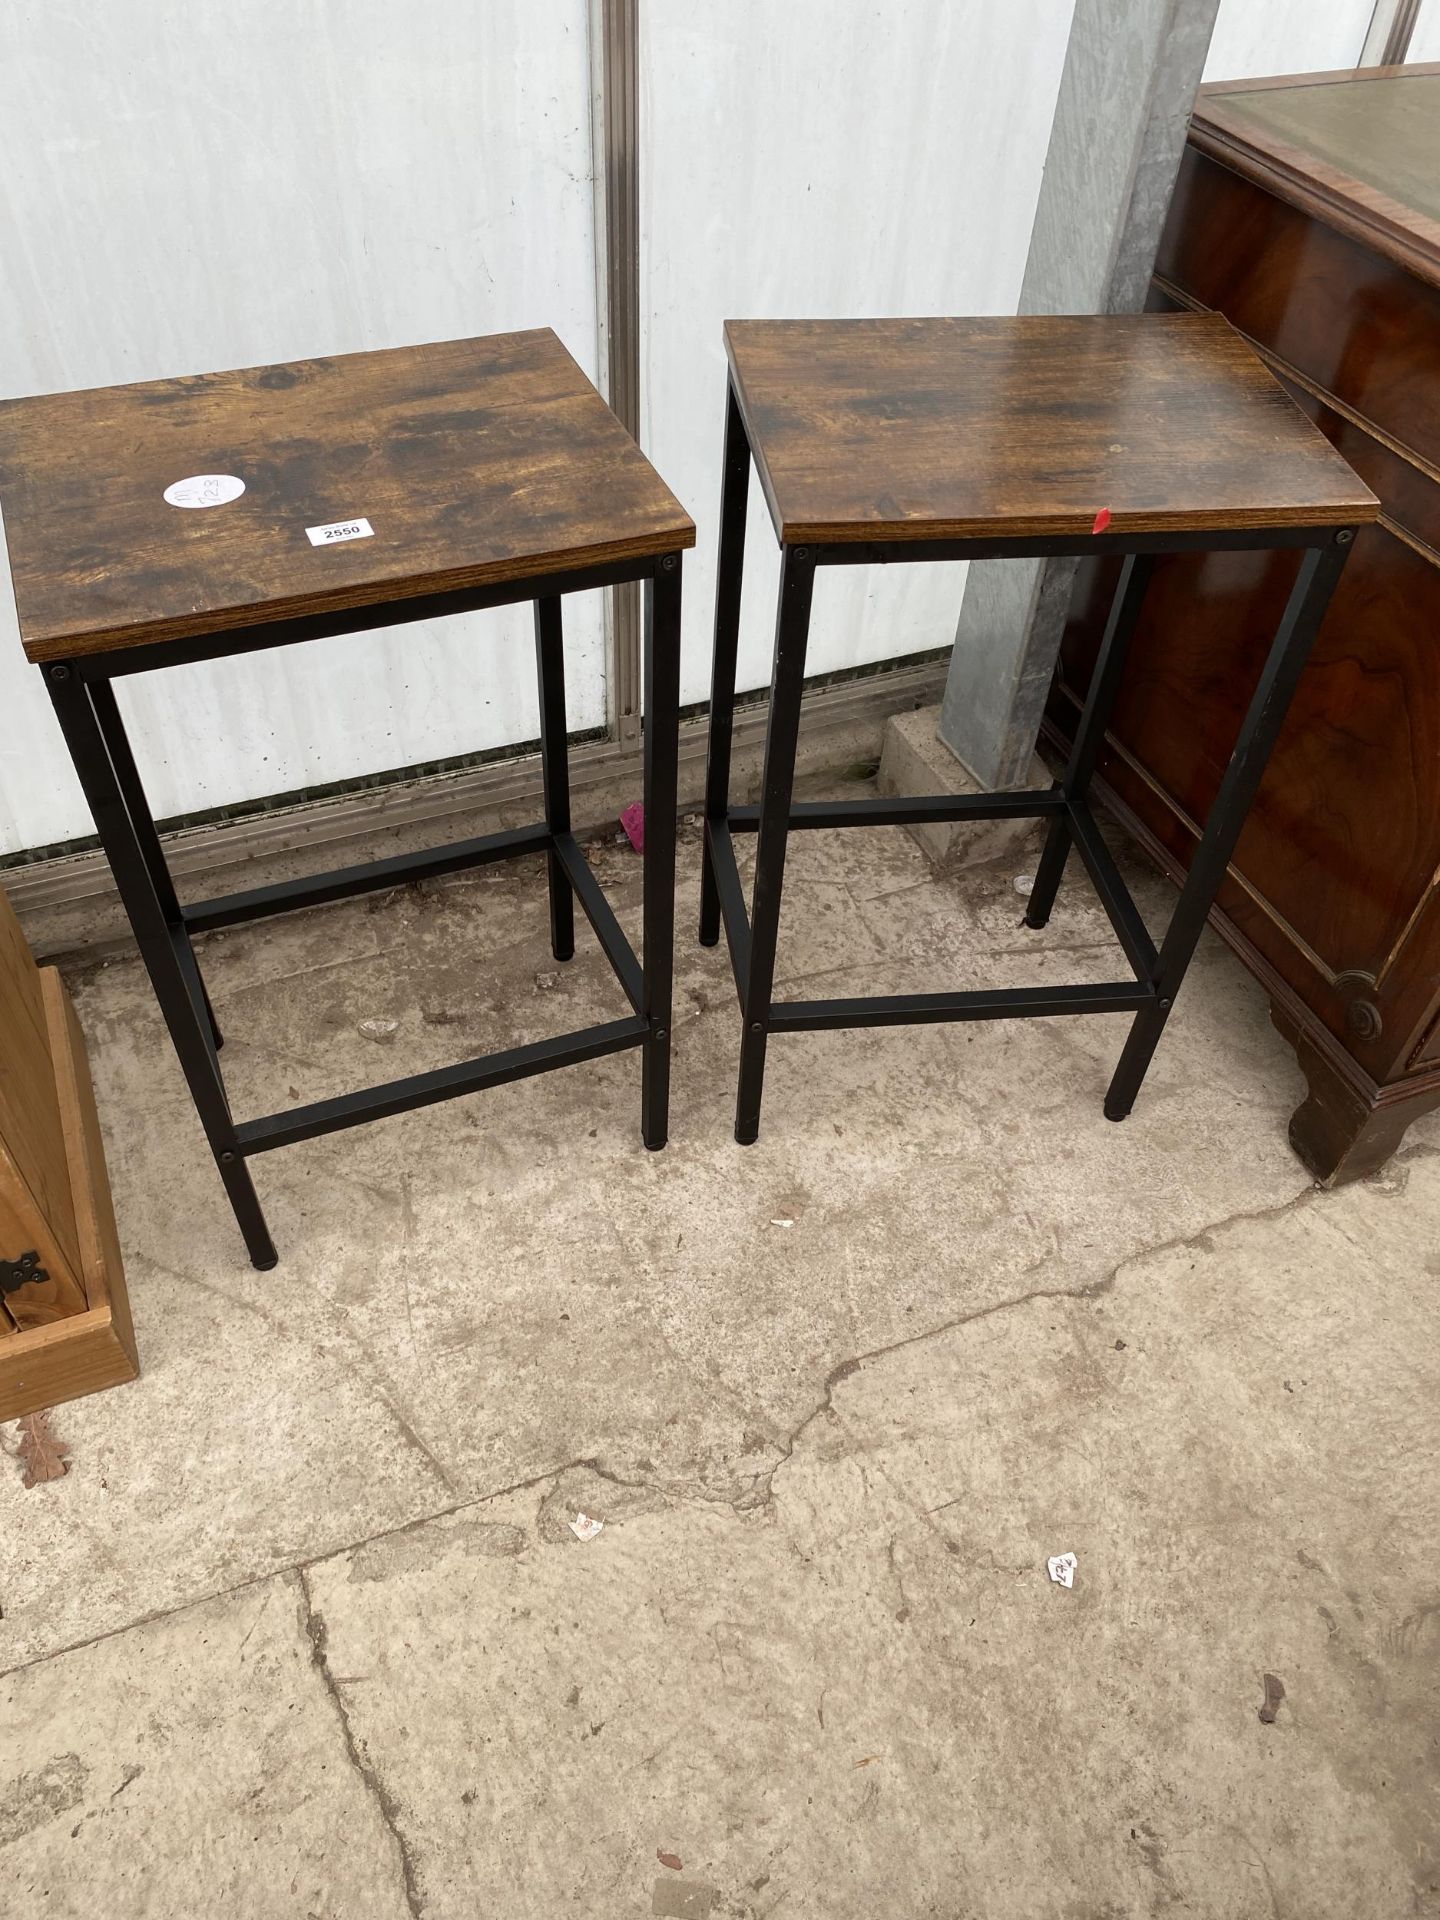 A PAIR OF GUANGZHOU LONGHE WOOD CO LAMP TABLES ON METAL FRAMES